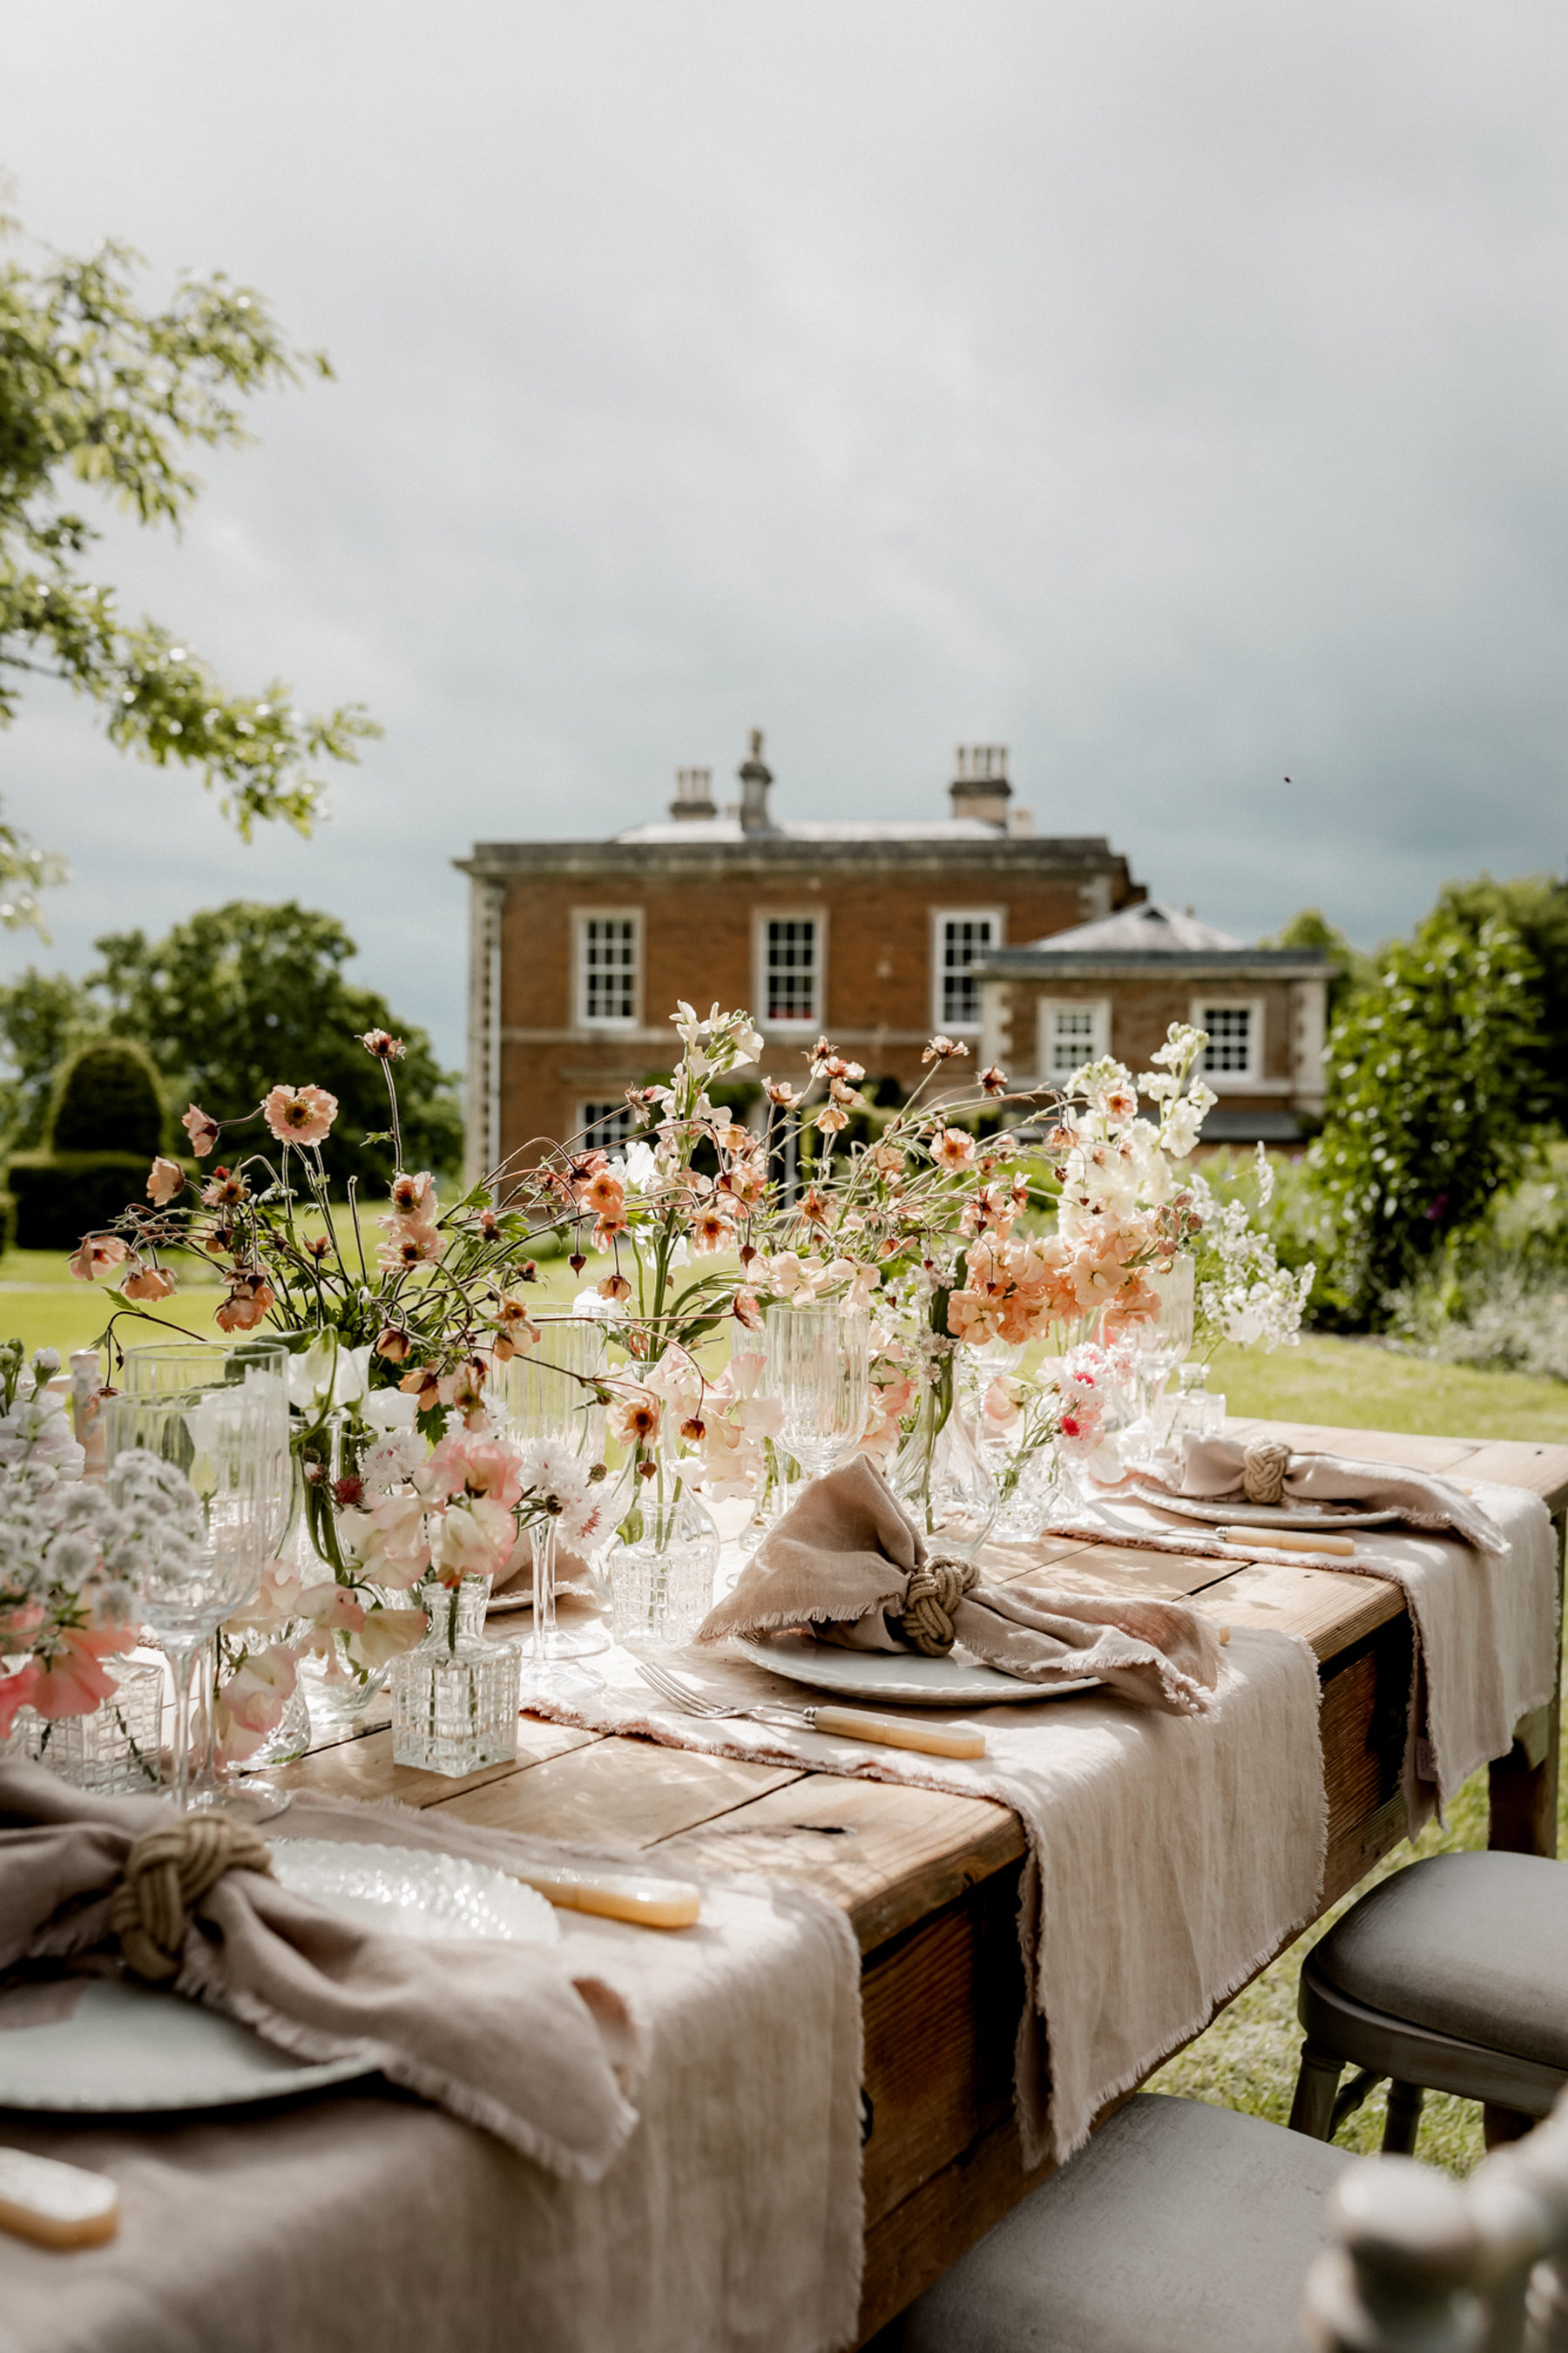 Outdoor wedding table at Keythorpe Hall, decorated with British grown seasonal Spring flowers and pale table linens